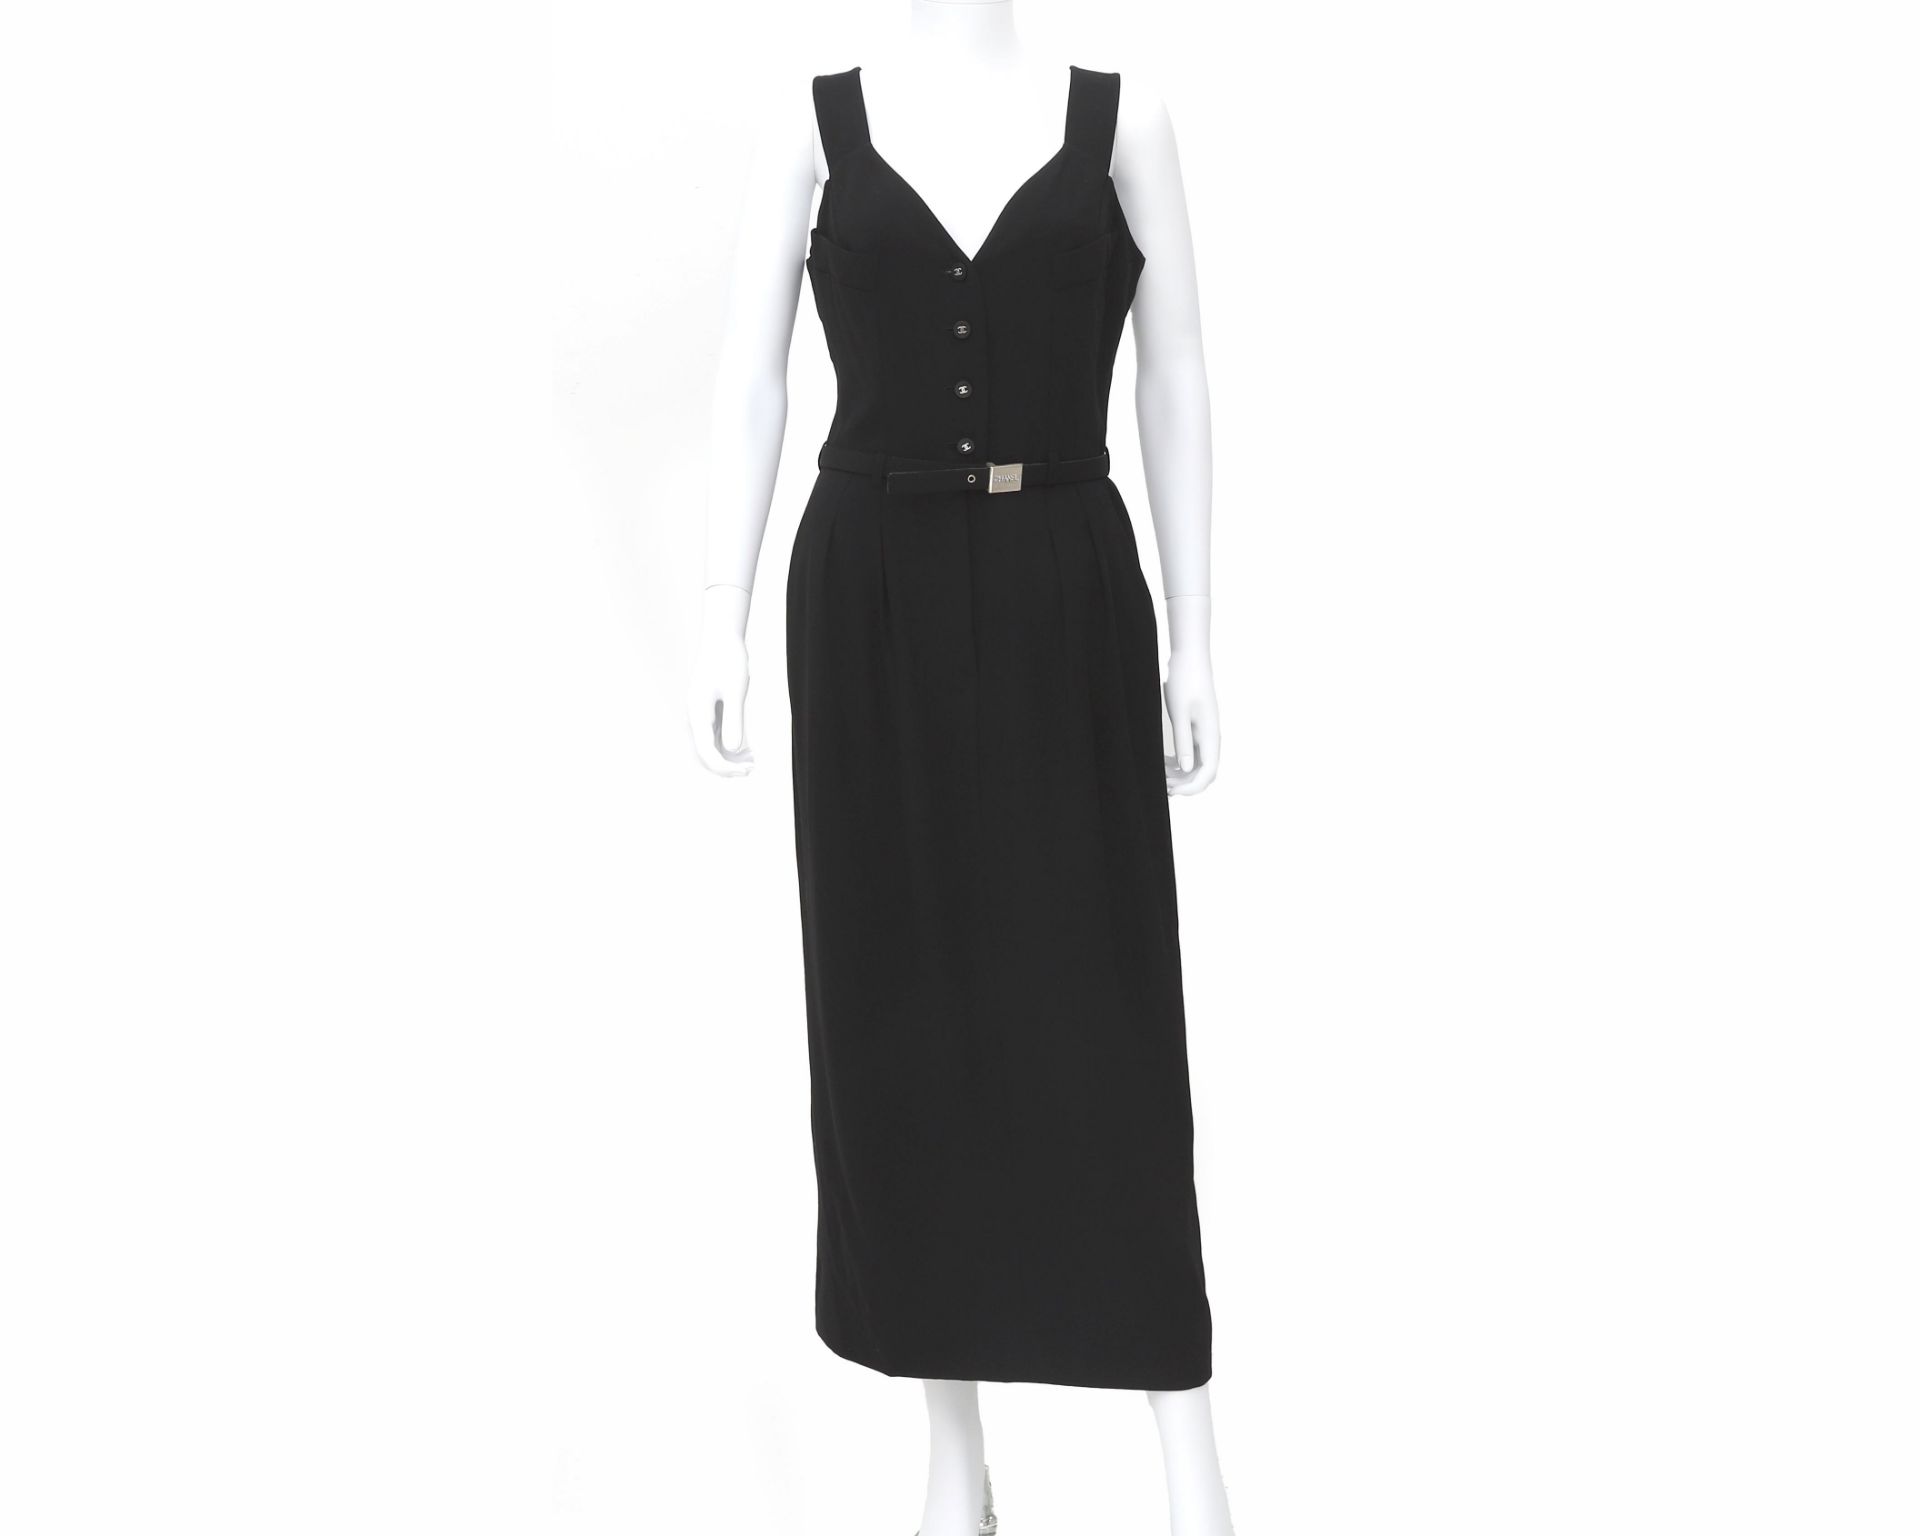 A Chanel Boutique black dress with belt. The belt has a silver-colored buckle with Chanel on it.